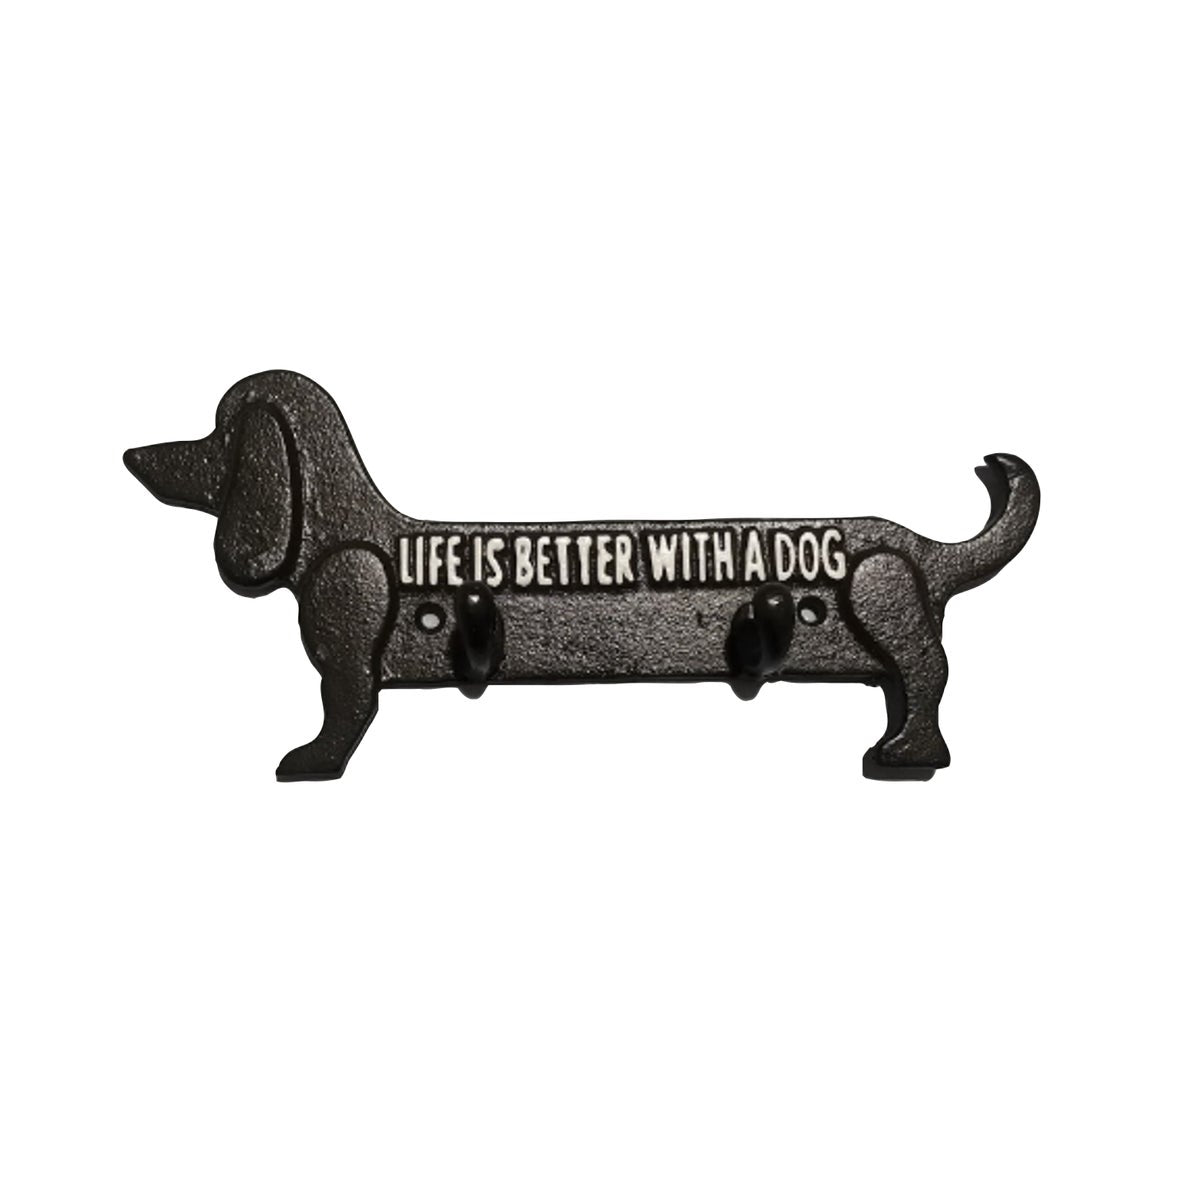 "Dachshund Cast Iron Hook with "Life is Better With a Dog